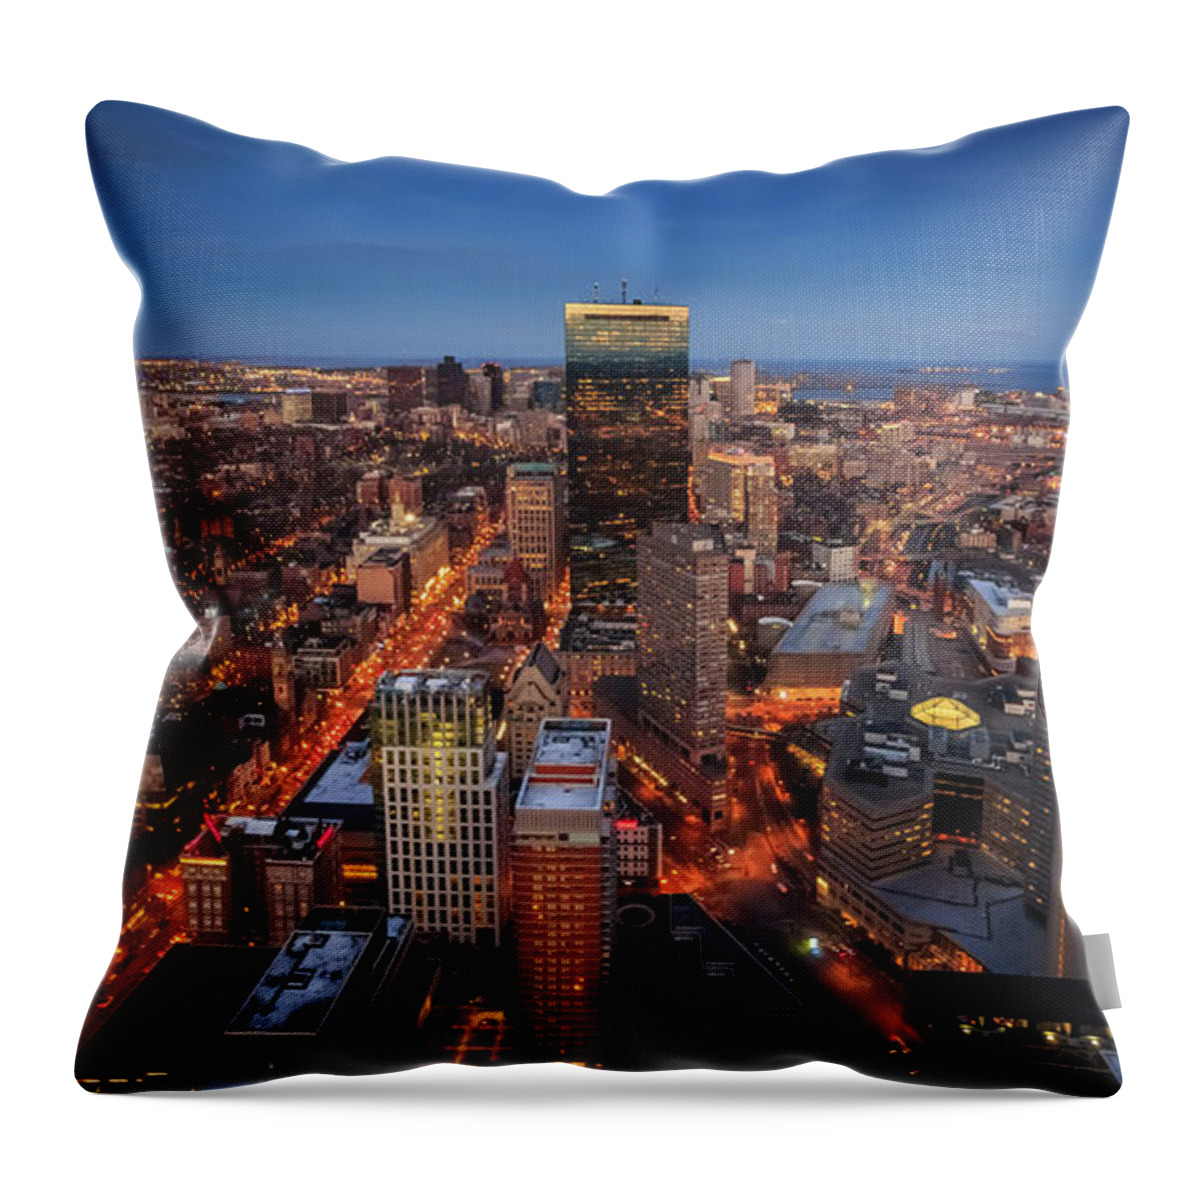 Outdoors Throw Pillow featuring the photograph Boston Skyline From The Prudential by (c) Swapan Jha